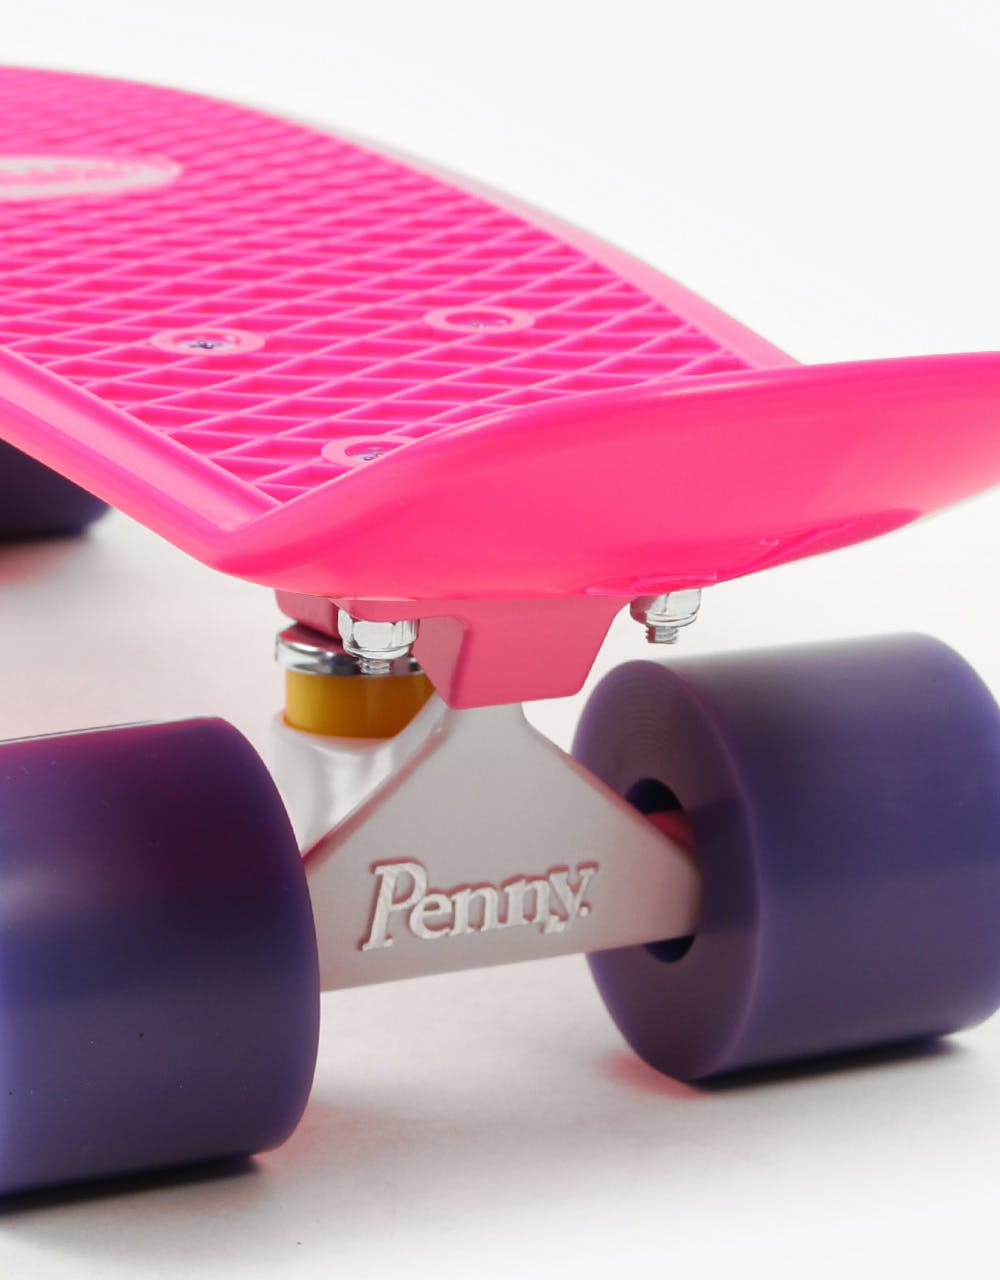 Penny Skateboards Classic Cruiser - 22" - Pink/White-Pink/Purple